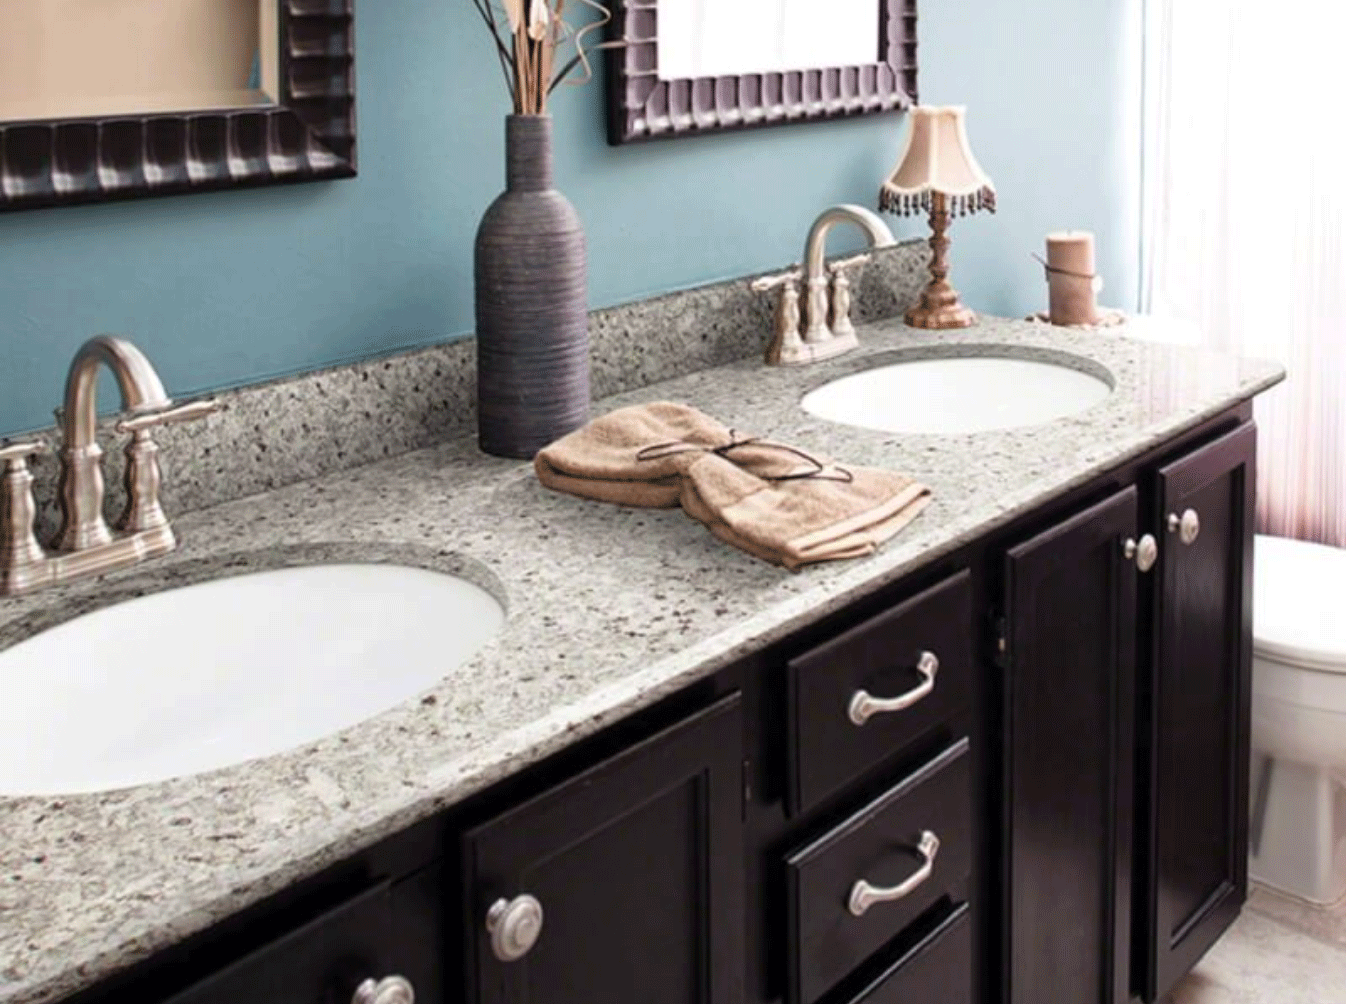 Proper Granite Countertop Sealing To Protect Your Investment